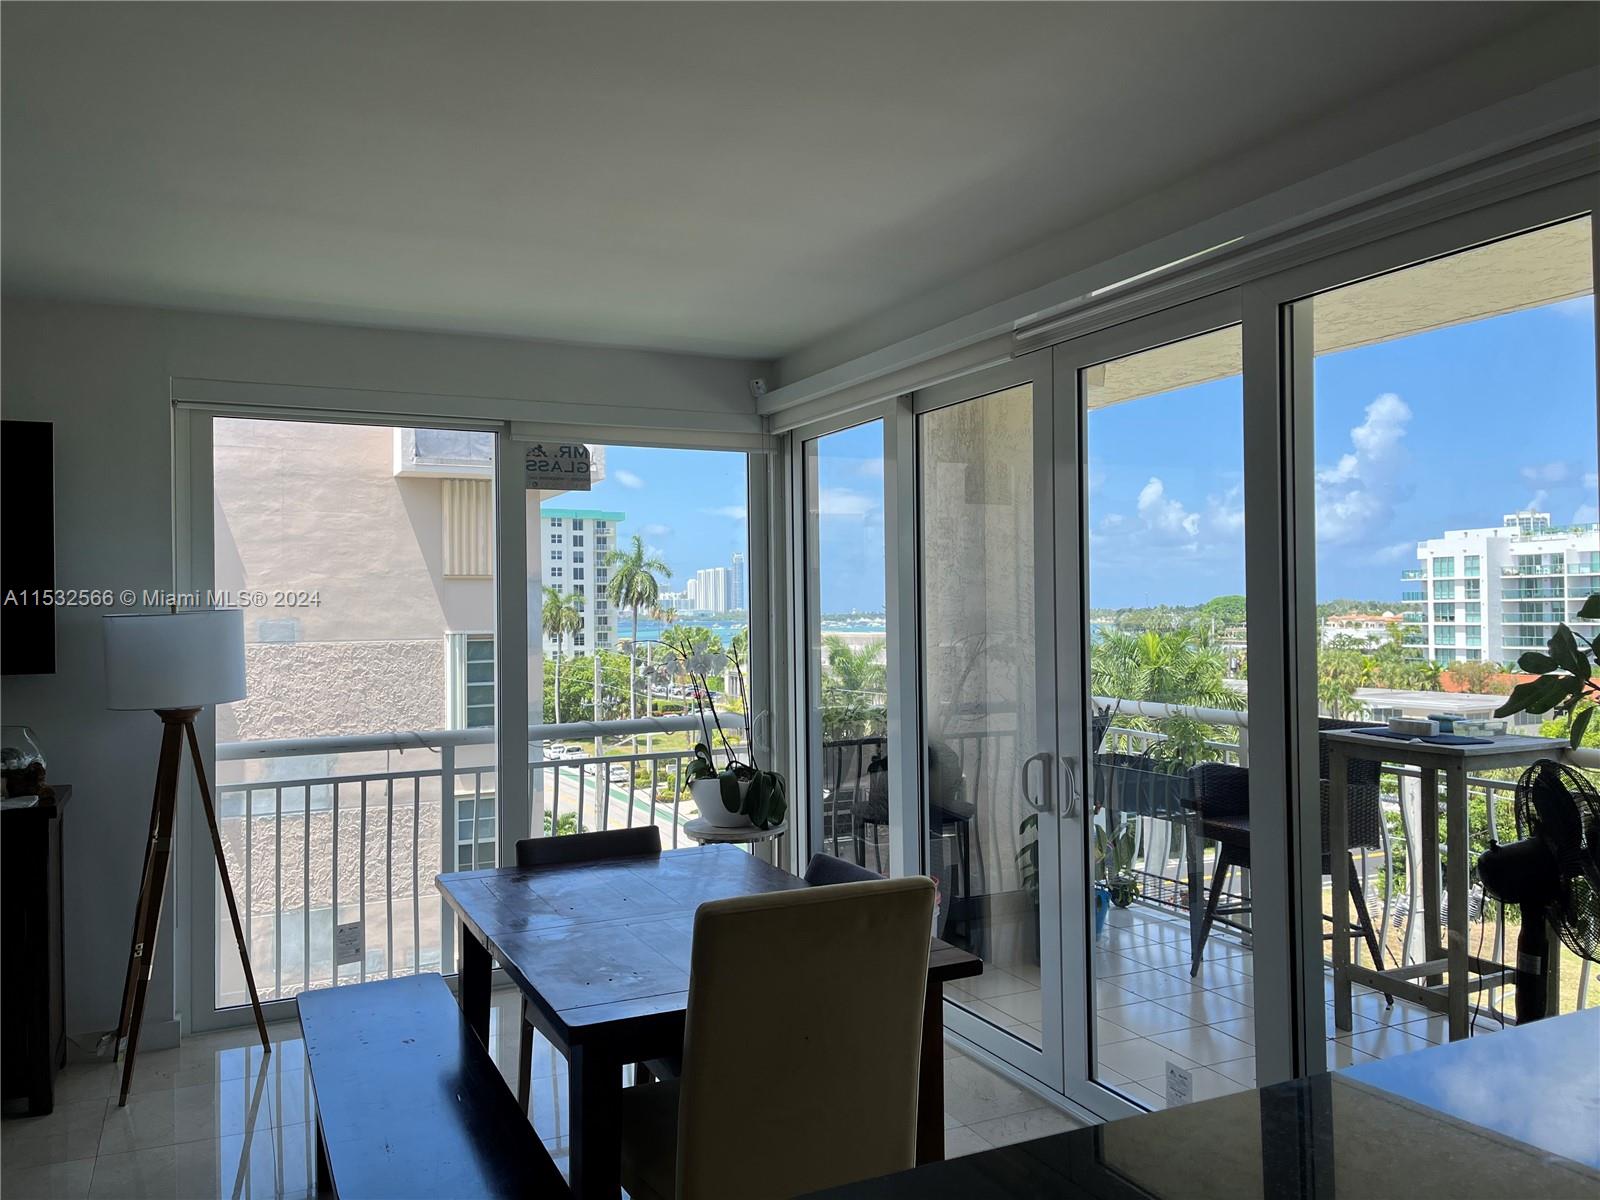 Introducing a stunning 2-bedroom, 2-bath split condominium unit in the heart of Bay Harbor Island, Florida. Spanning 1300 square feet, this modern abode offers a balcony boasting breathtaking views of the Bay. Enjoy the convenience of being minutes away from Bal Harbor and its prestigious shops, as well as easy access to US1, Biscayne Blvd, and Interstate 95. Embrace luxury living with this prime waterfront property.
Property has a new Dock along Intercoastal, Pool and Covered Parking